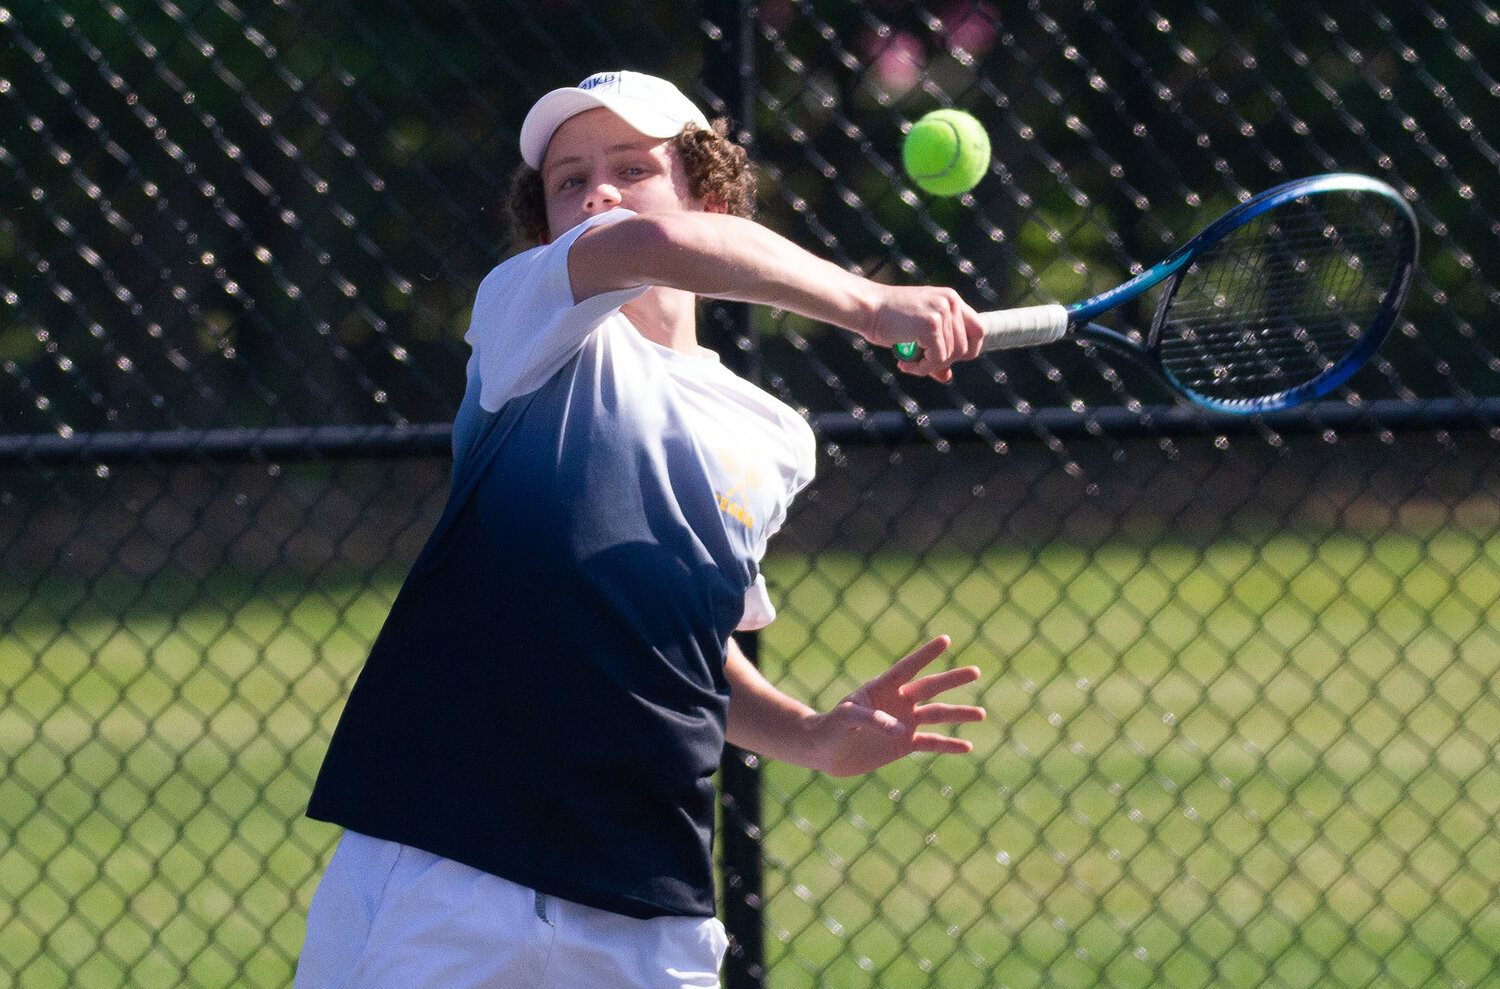 Barrington's Charlie Martin hits the ball during his match against Mount St. Charles.